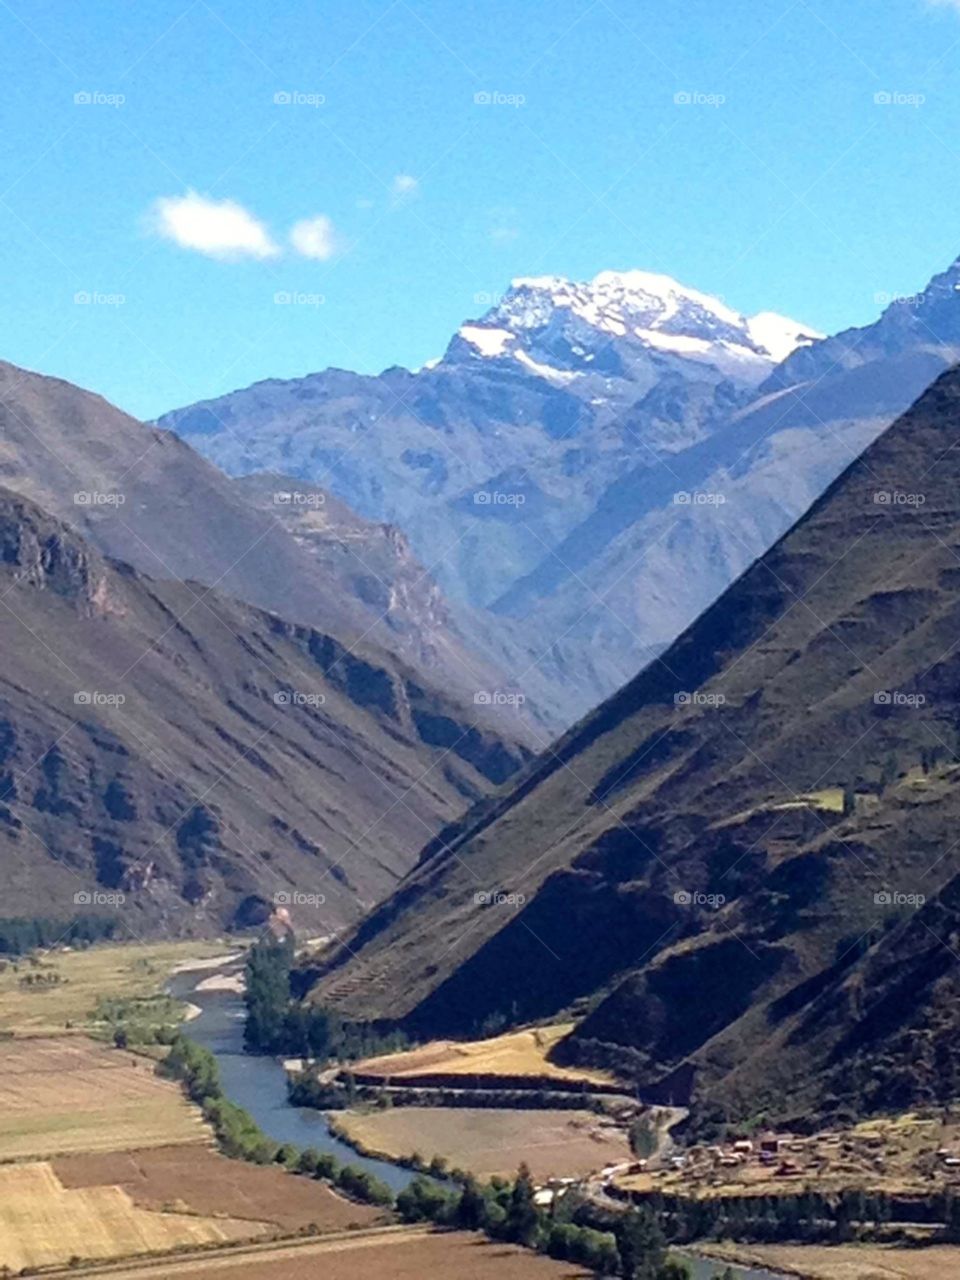 Andes mountains, Peru 